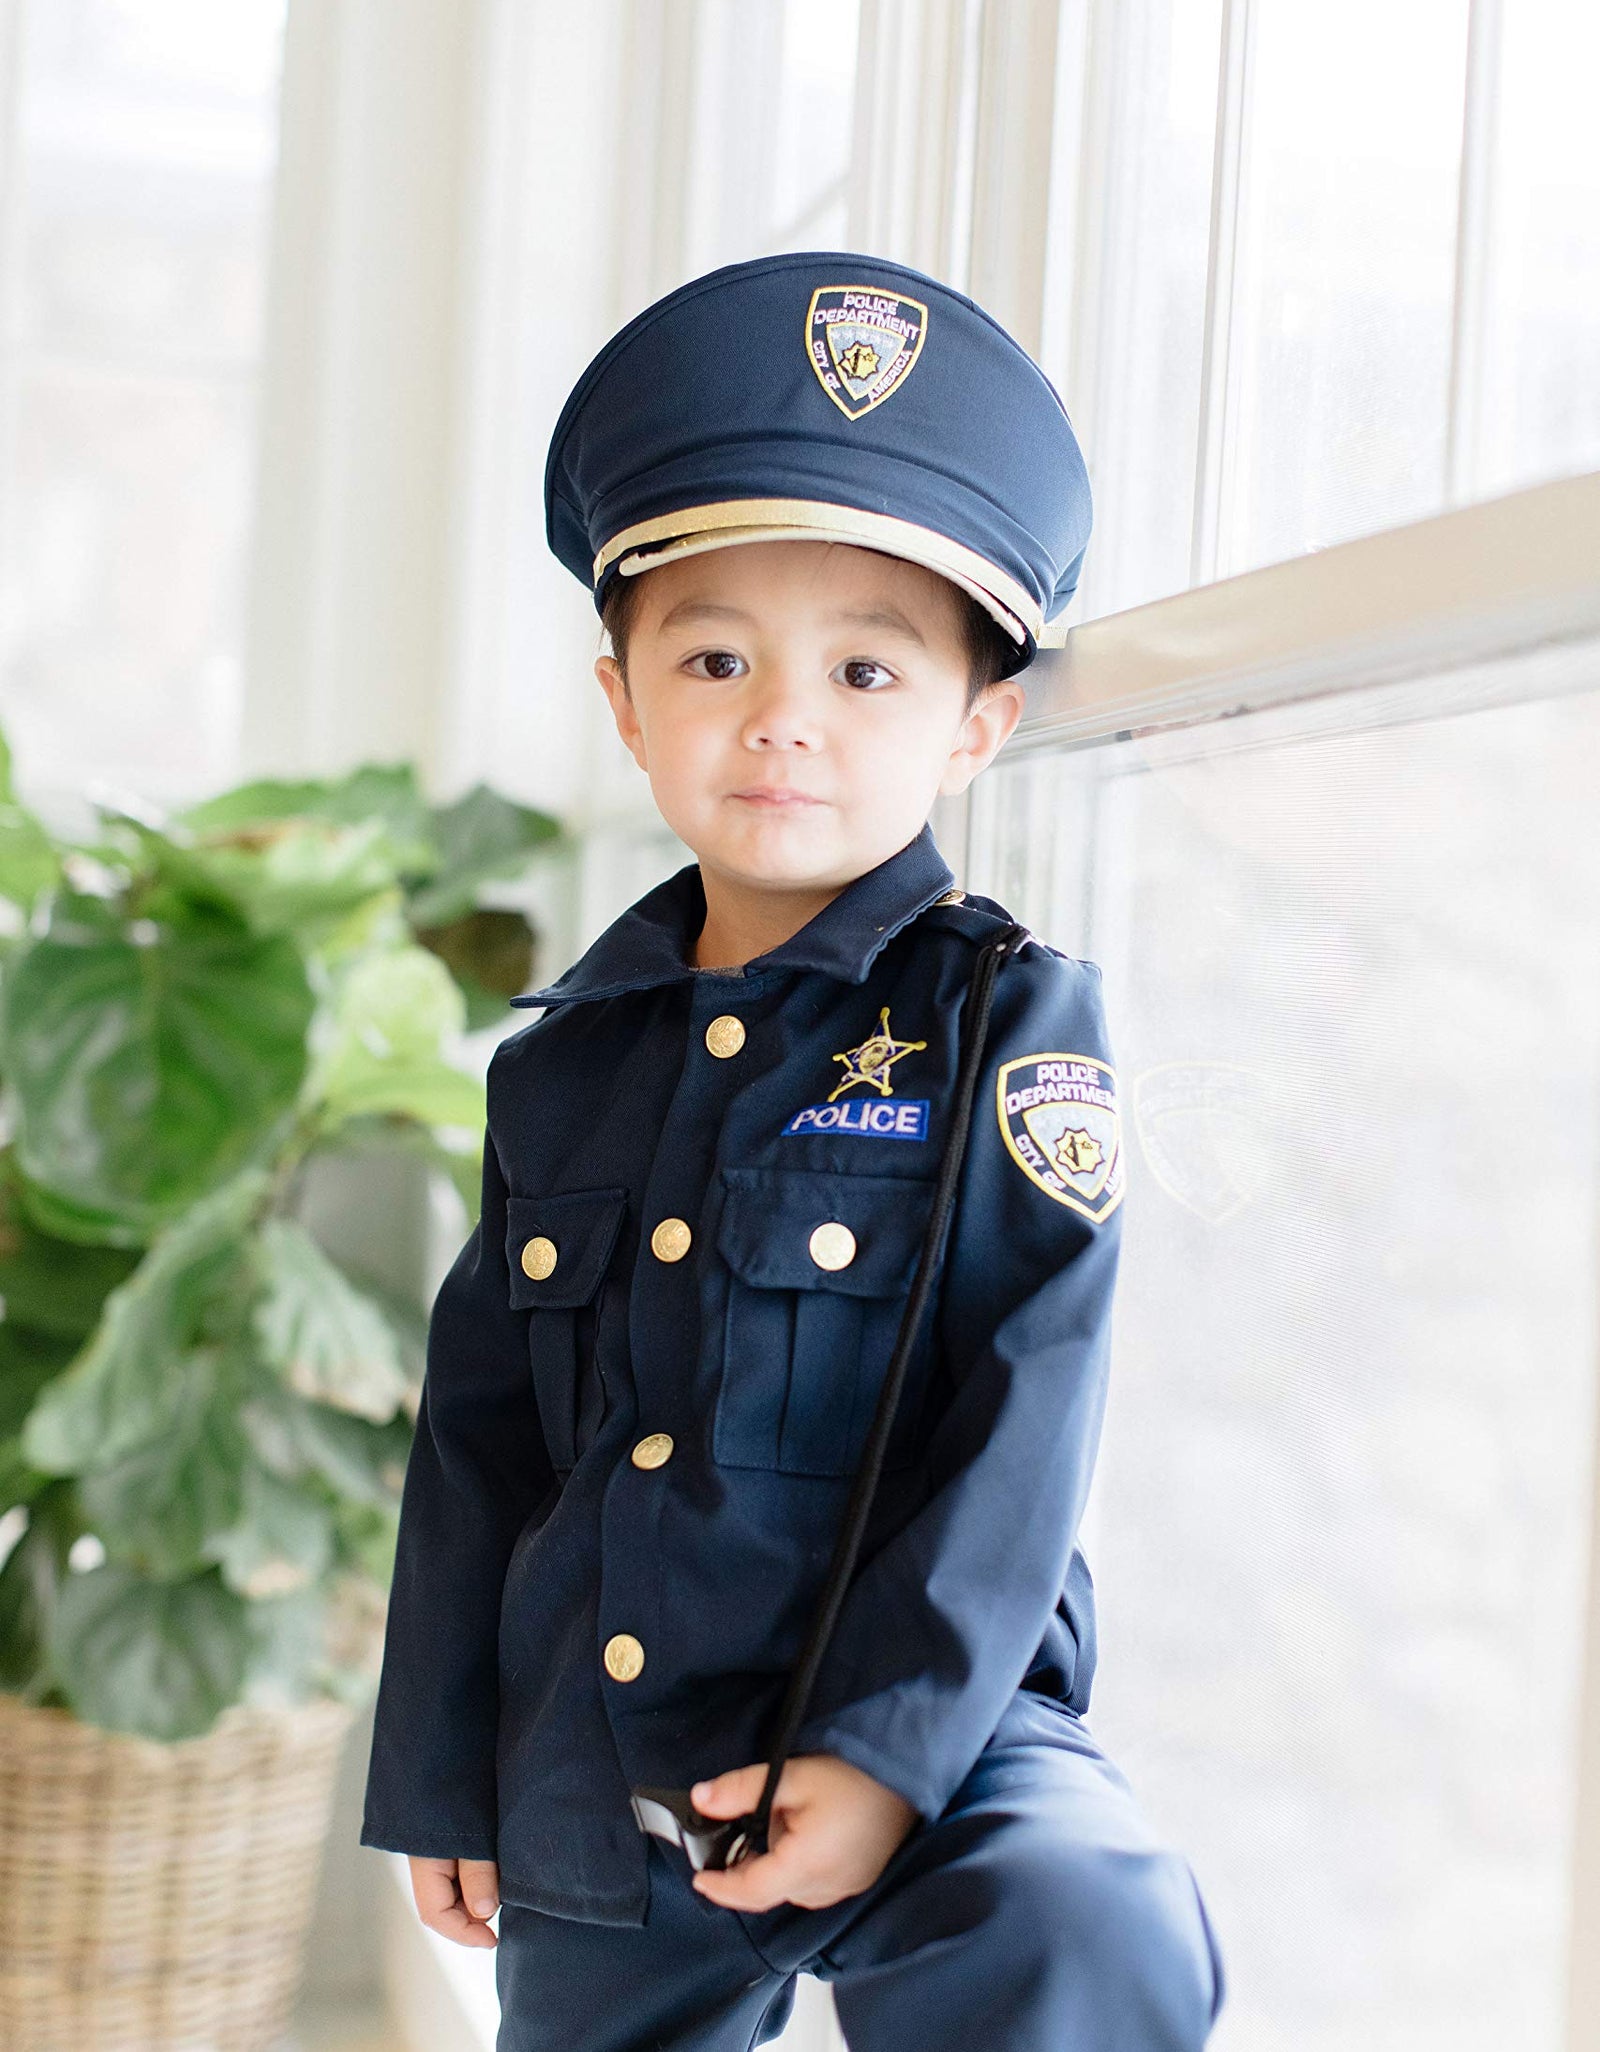 Dress-Up-America Police Costume For Boys - Shirt, Pants, Hat, Belt, Whistle, Gun Holster, and Walkie Talkie Cop Set